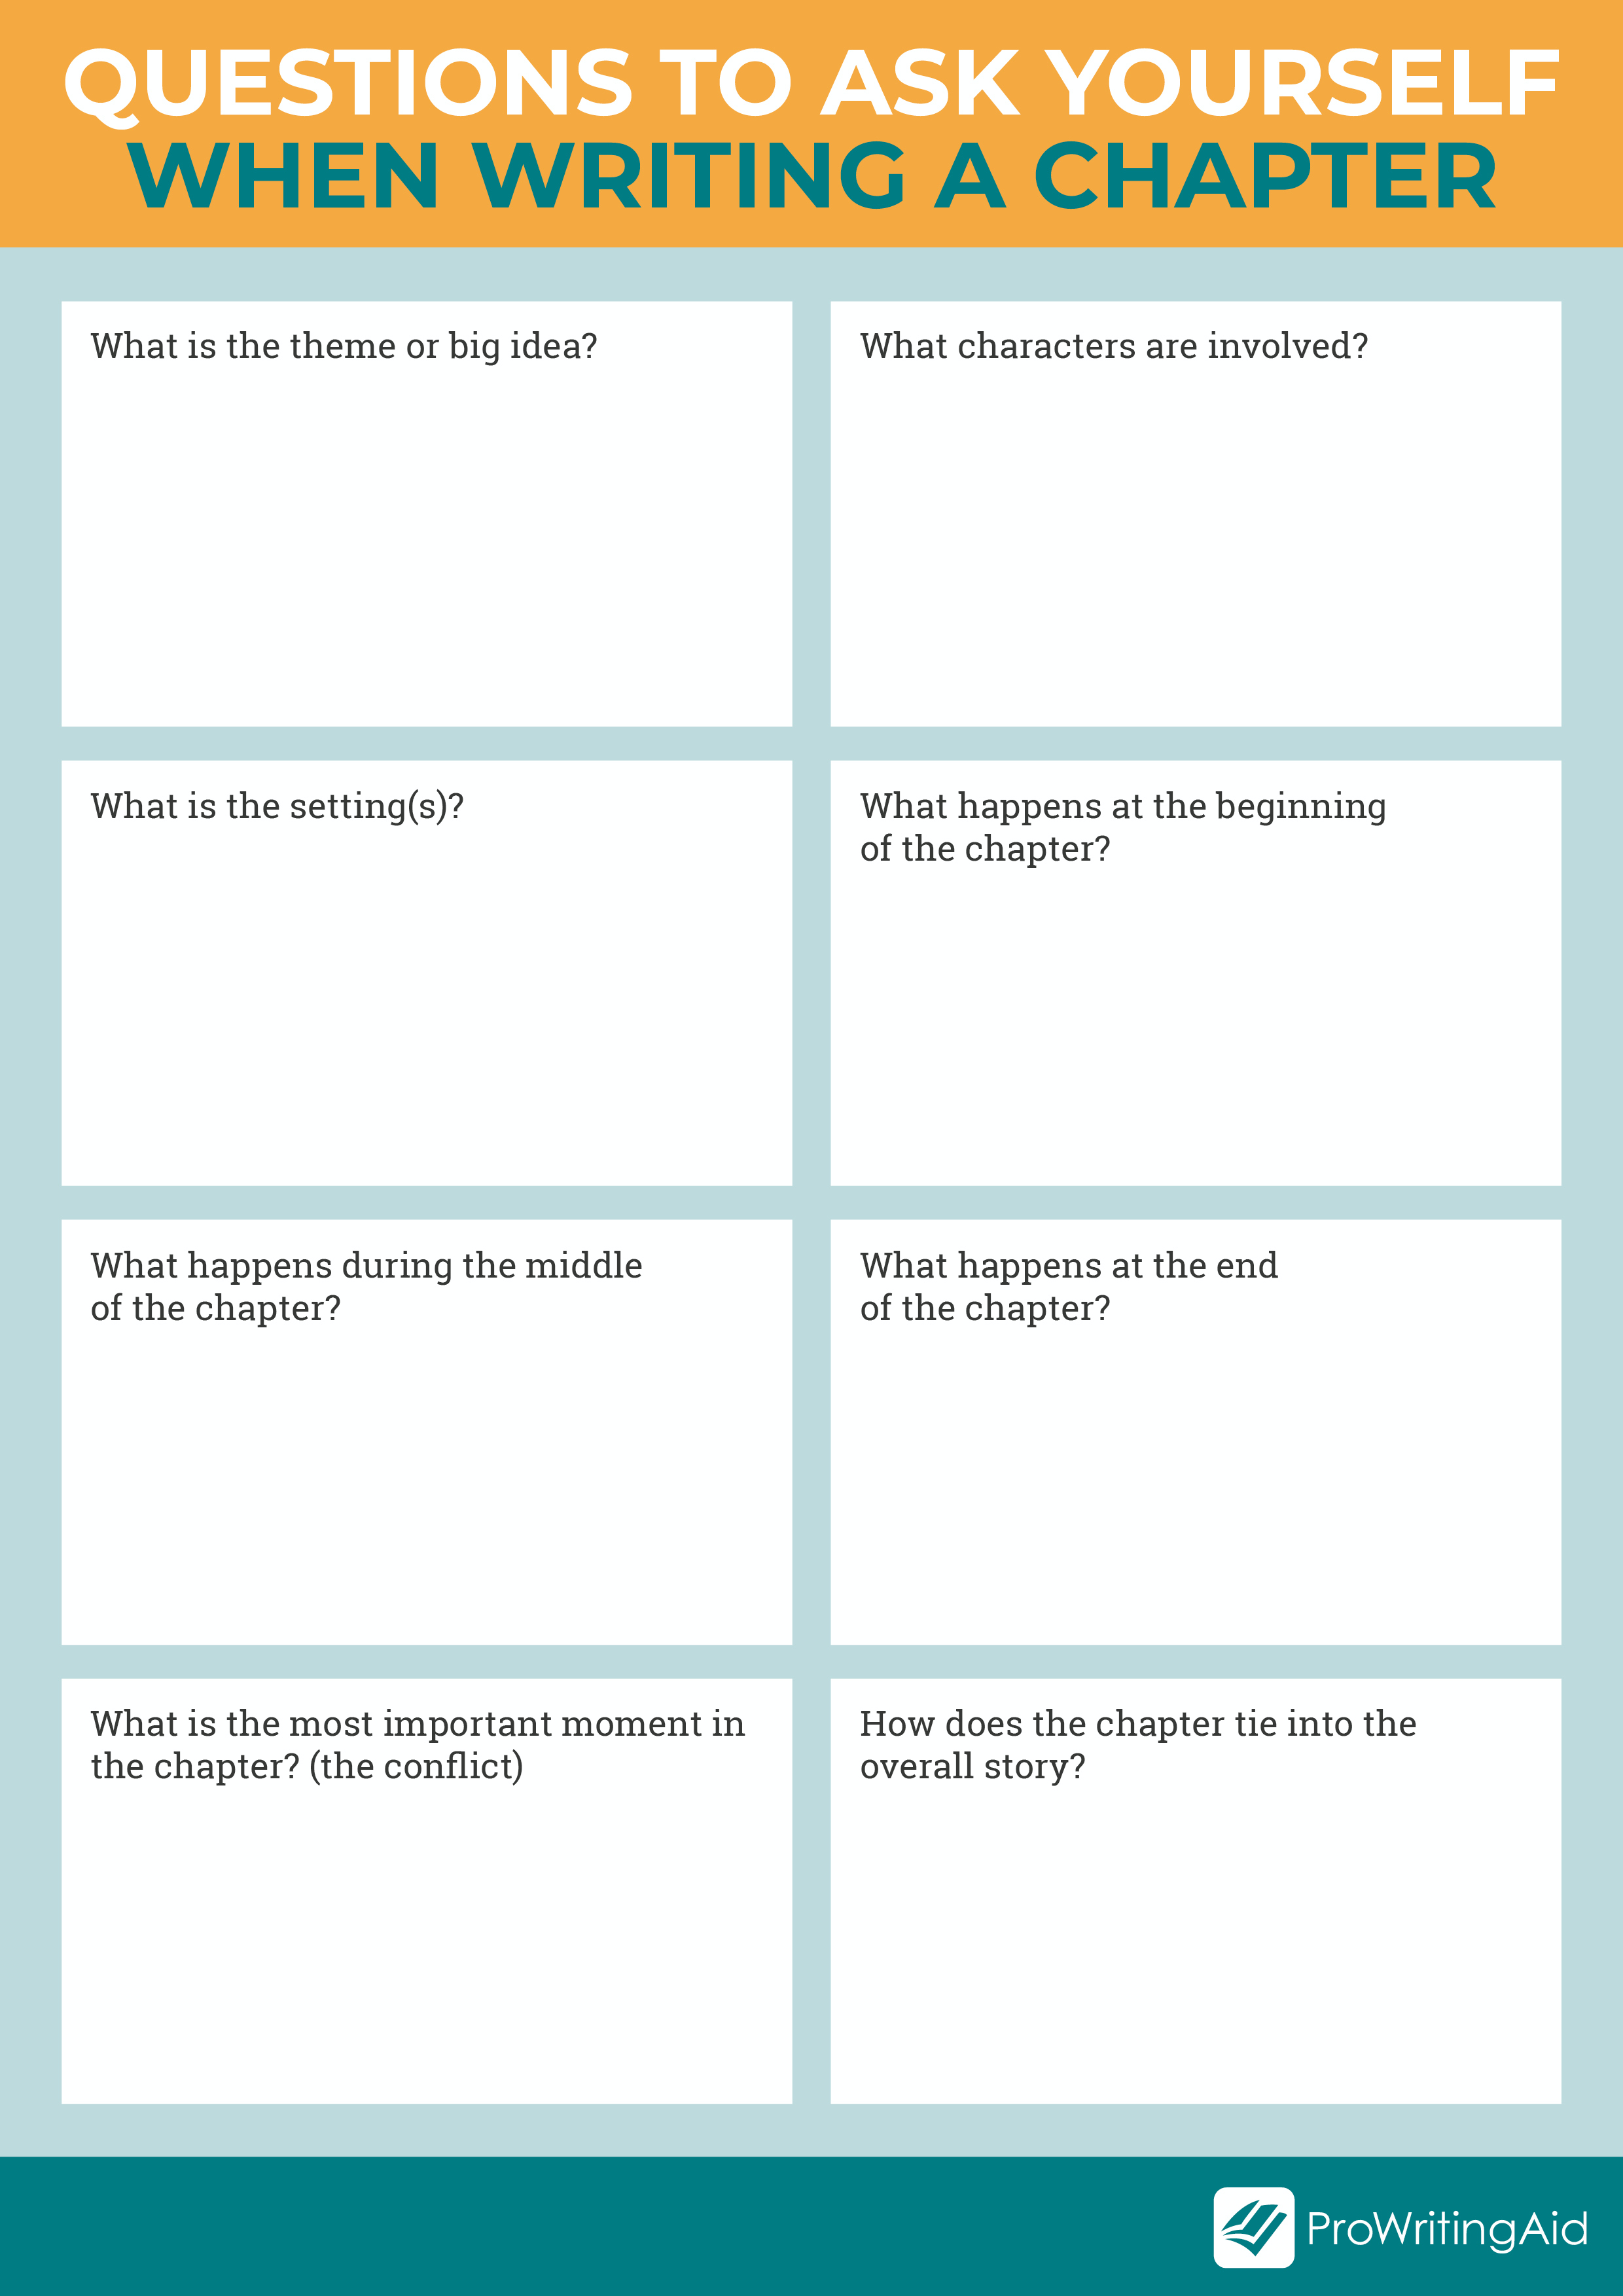 Questions to ask yourself when writing a chapter